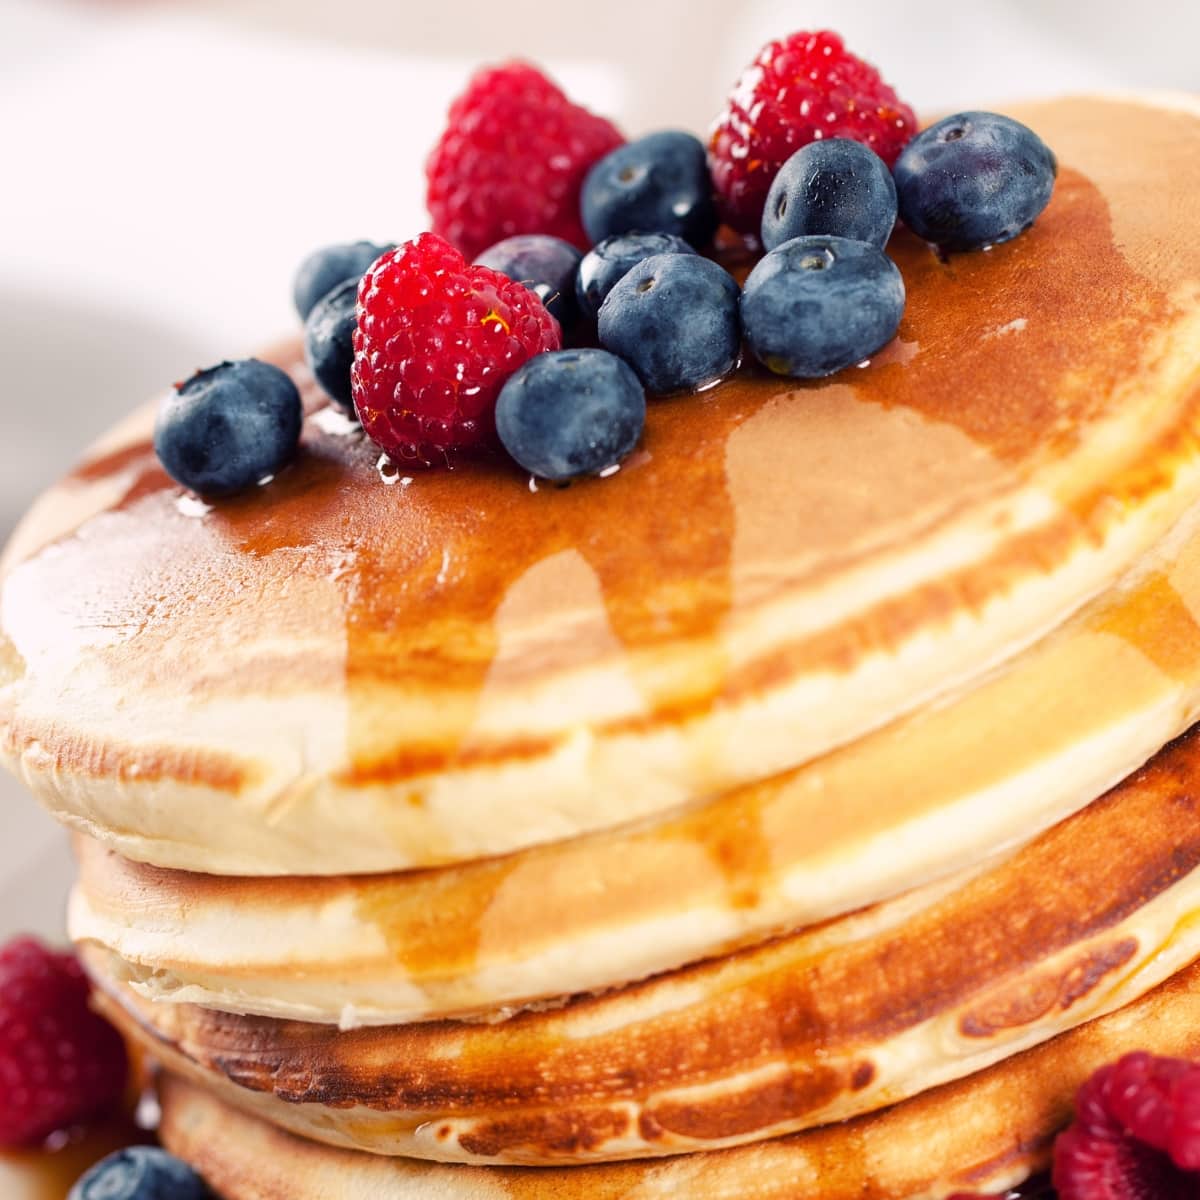 Fluffy Bisquick pancakes stack on a plate topped with blueberries and raspberries.